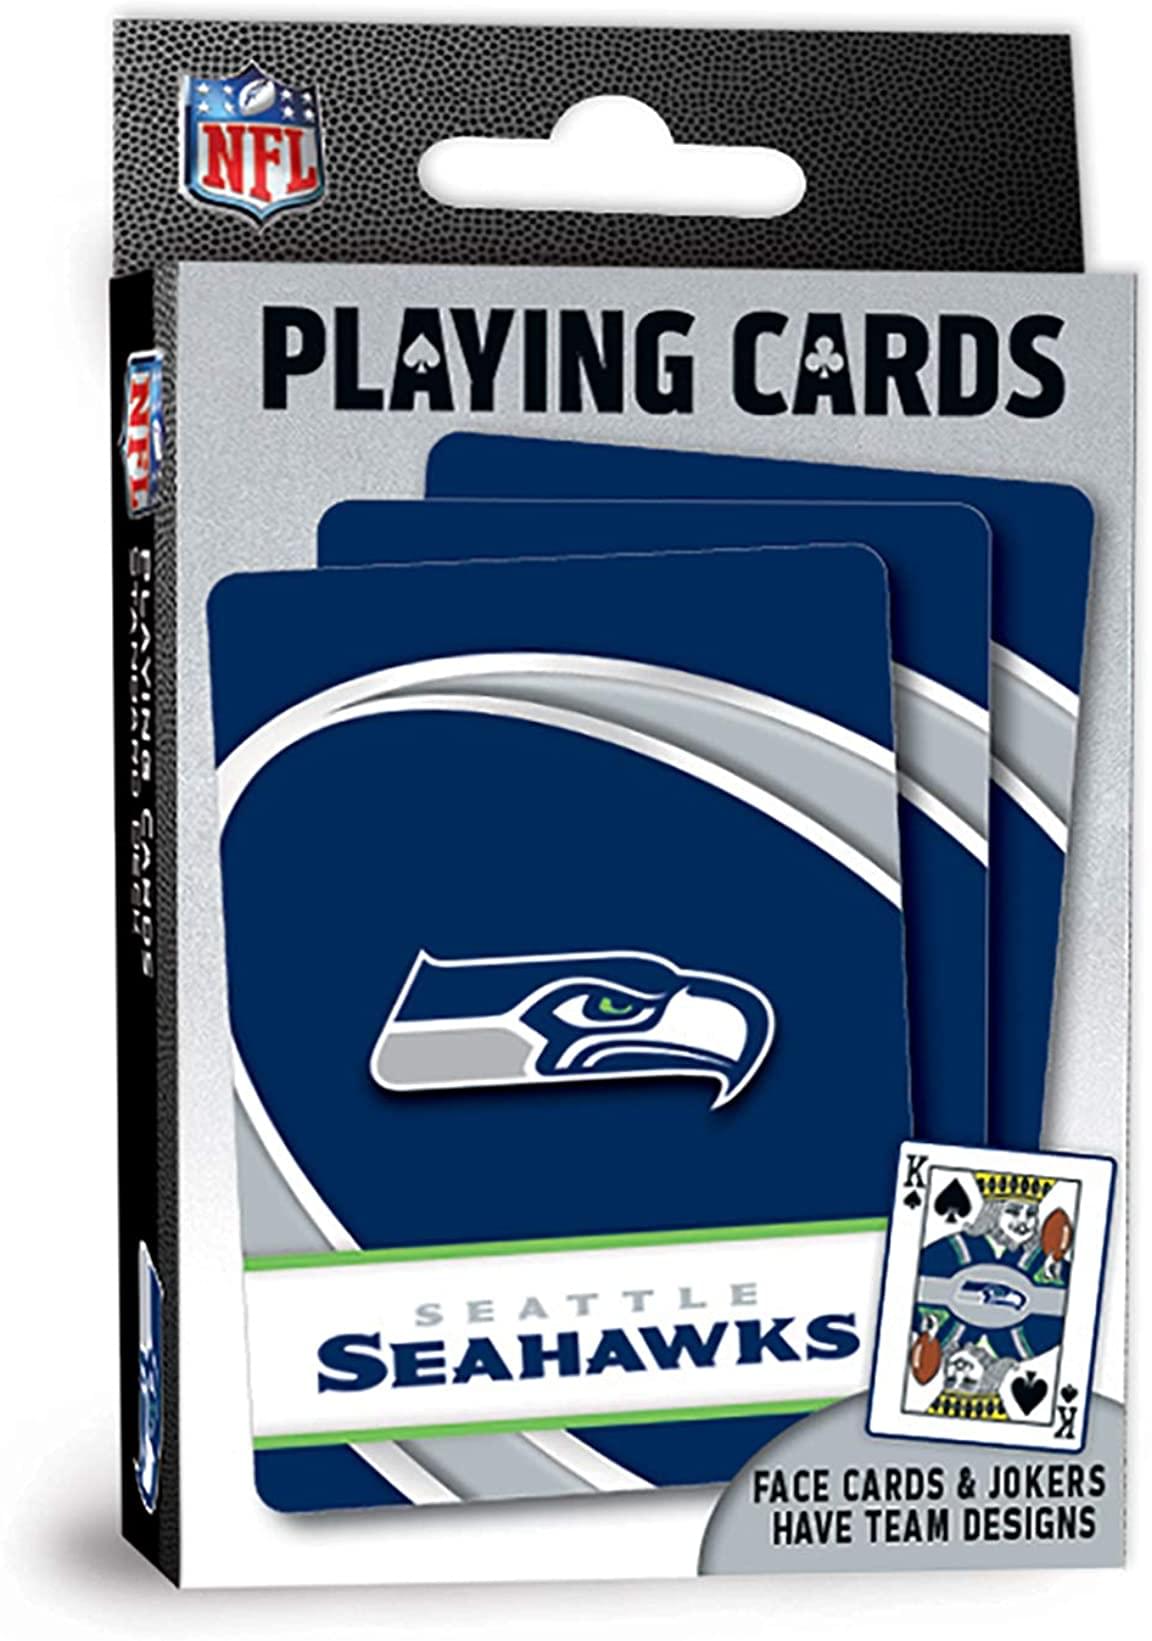 Seattle Seahawks NFL Playing Cards